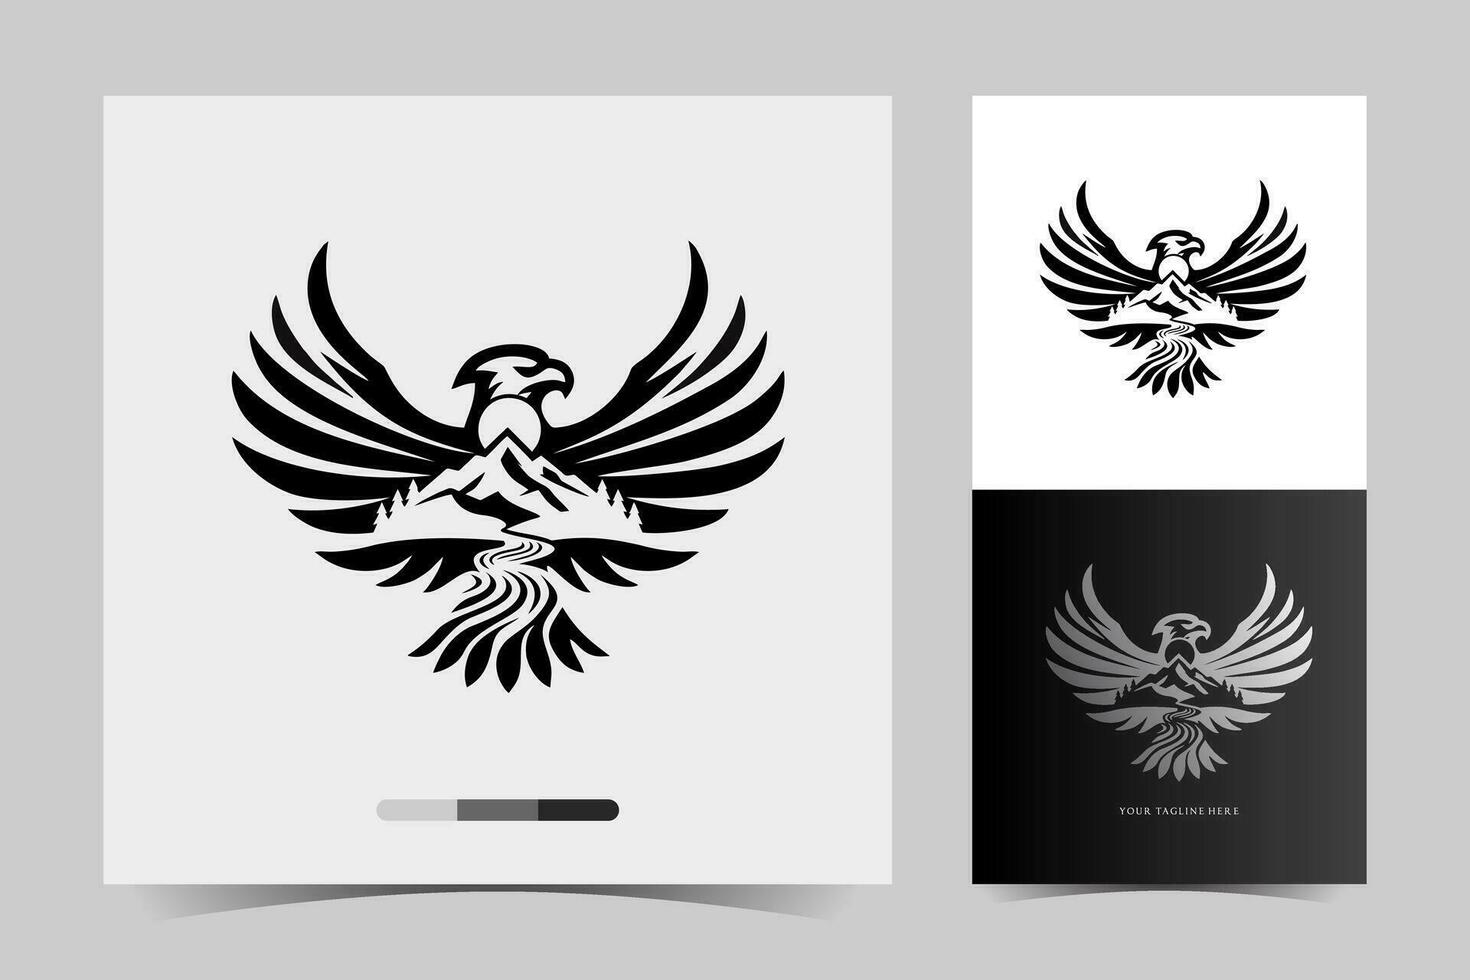 a black and white eagle logo with a white background vector